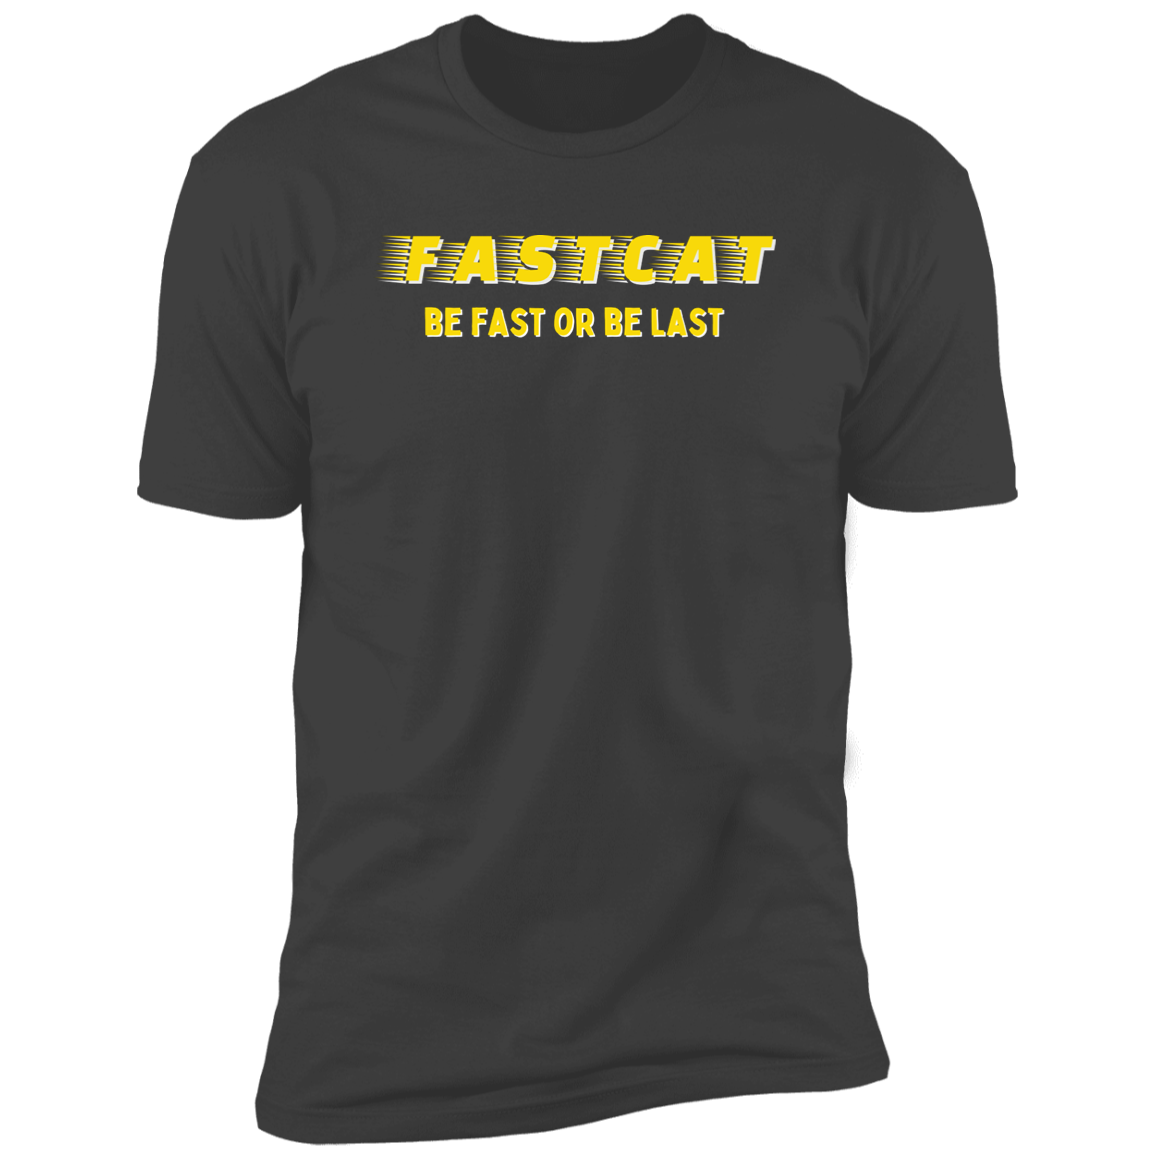 FastCAT Be Fast or Be Last Dog Sport T-shirt, FastCAT Shirt for humans, in heavy metal gray